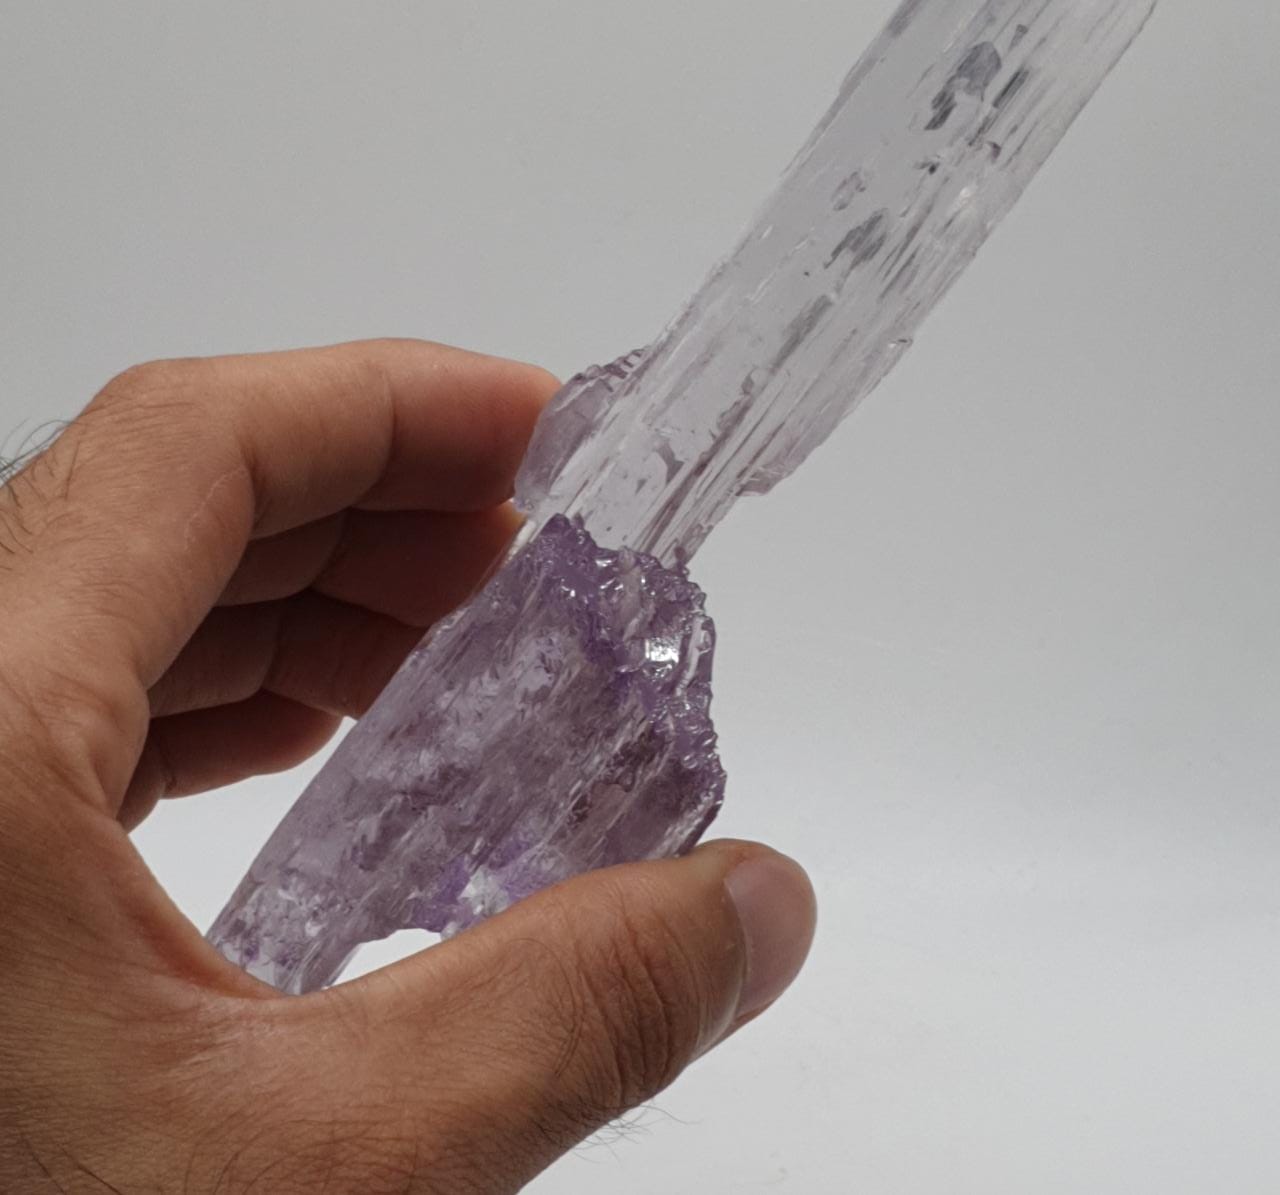 Sculptural and Unusual Crystallography for Pink Kunzite